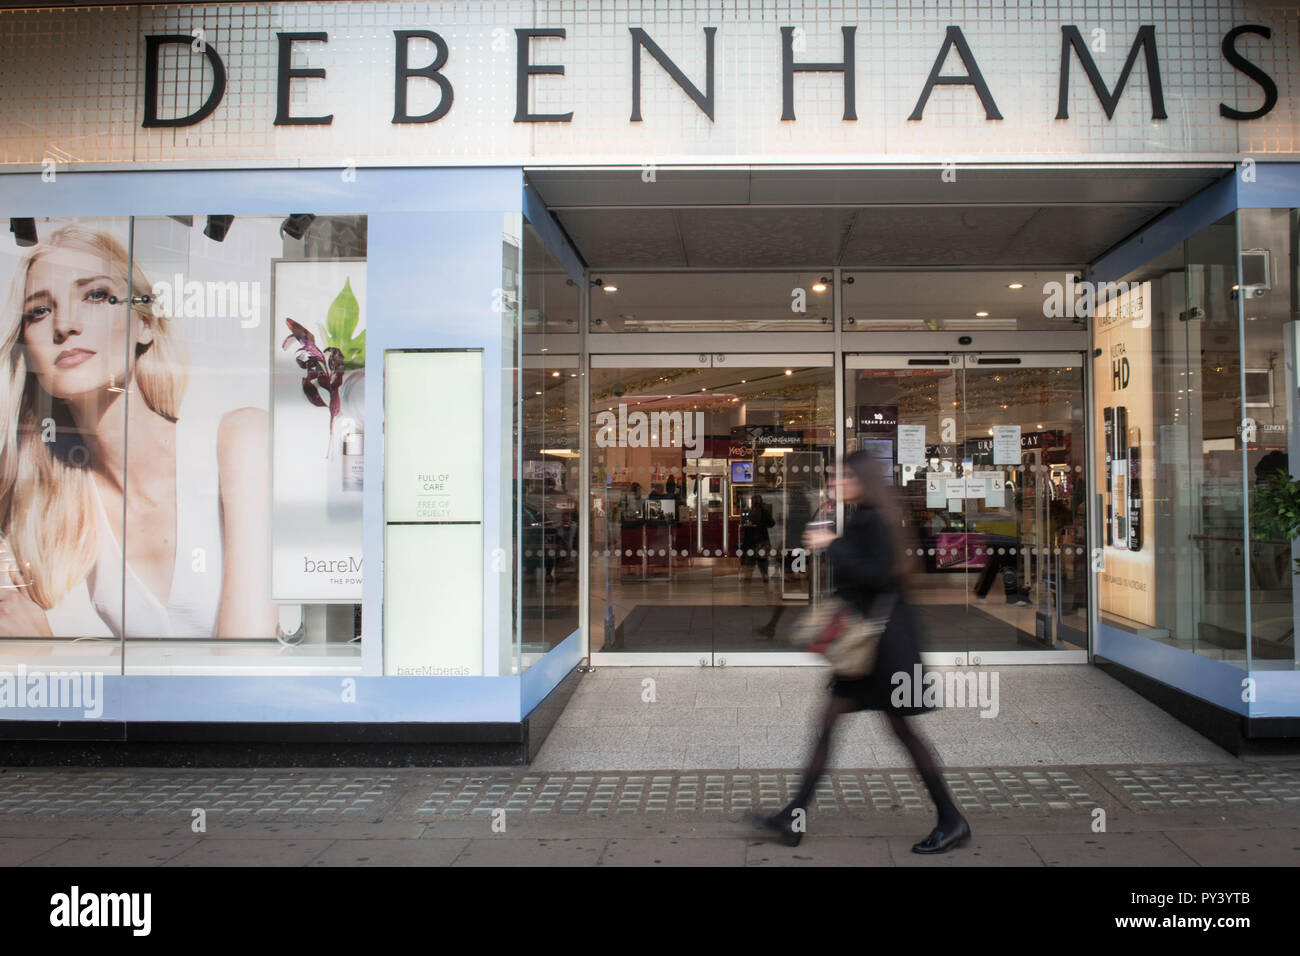 Debenhams department store in Oxford Street, central London. Debenhams has unveiled plans to axe up to 50 high street shops, putting around 4,000 jobs at risk, as the struggling department store chain swung to a near £500 million loss. Stock Photo